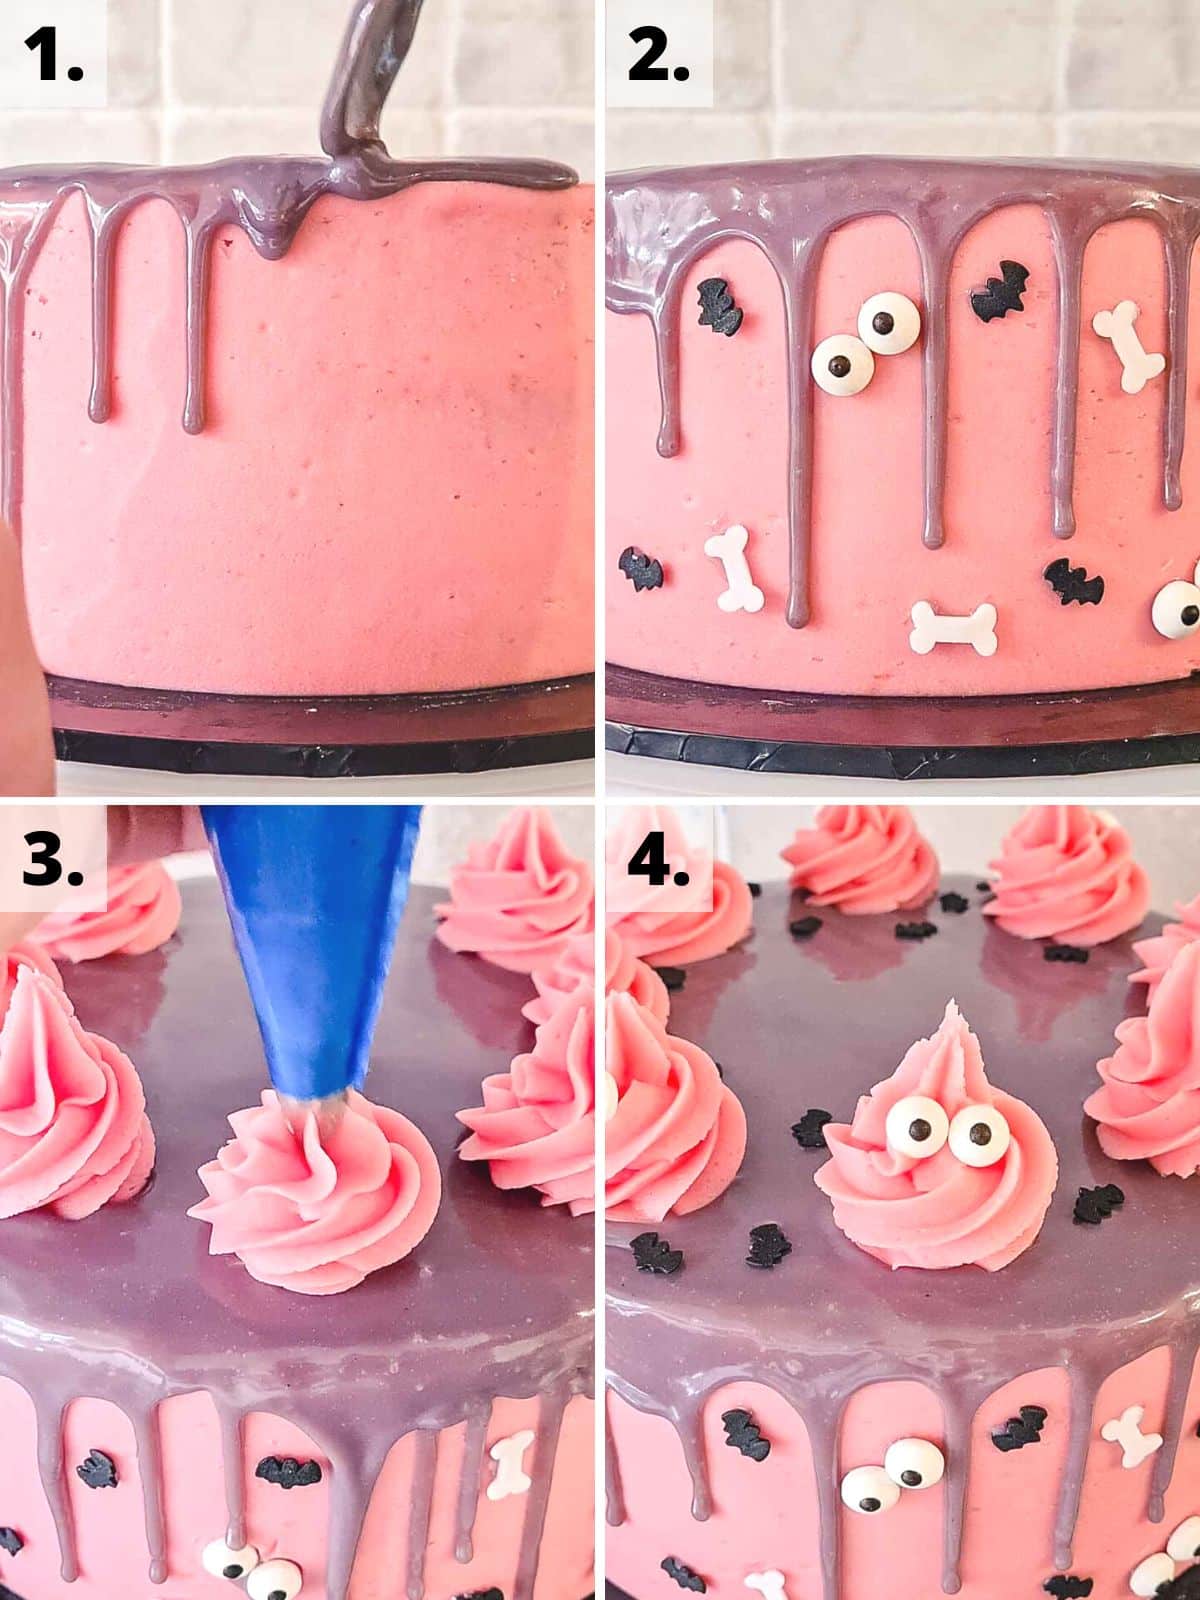 steps 1 to 4 for how to decorate a pink Halloween cake.